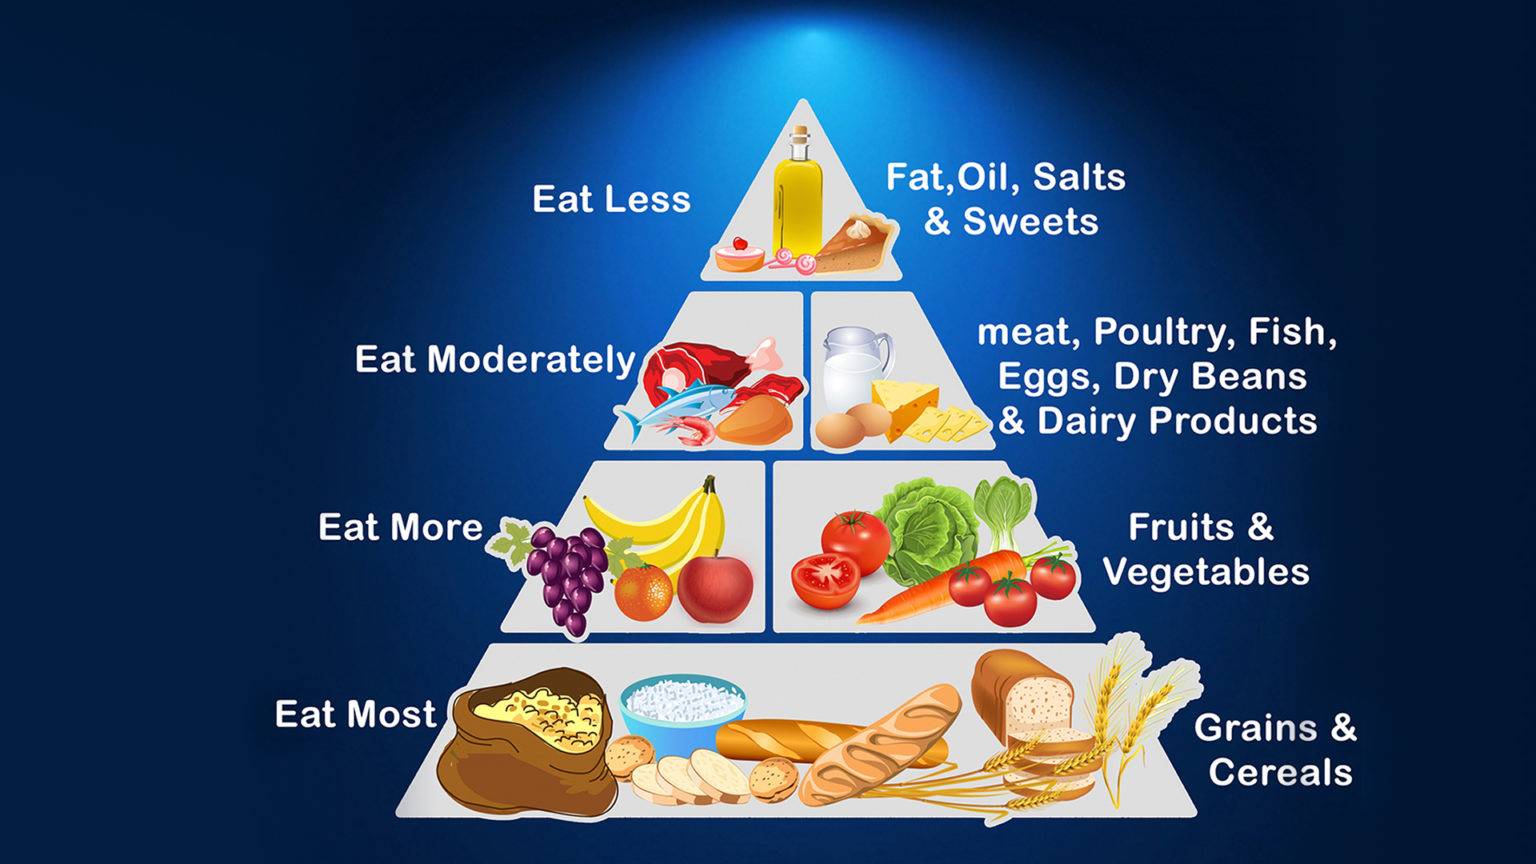 Functions Of Food, Food Groups, Food Pyramid – NutritionFact.in